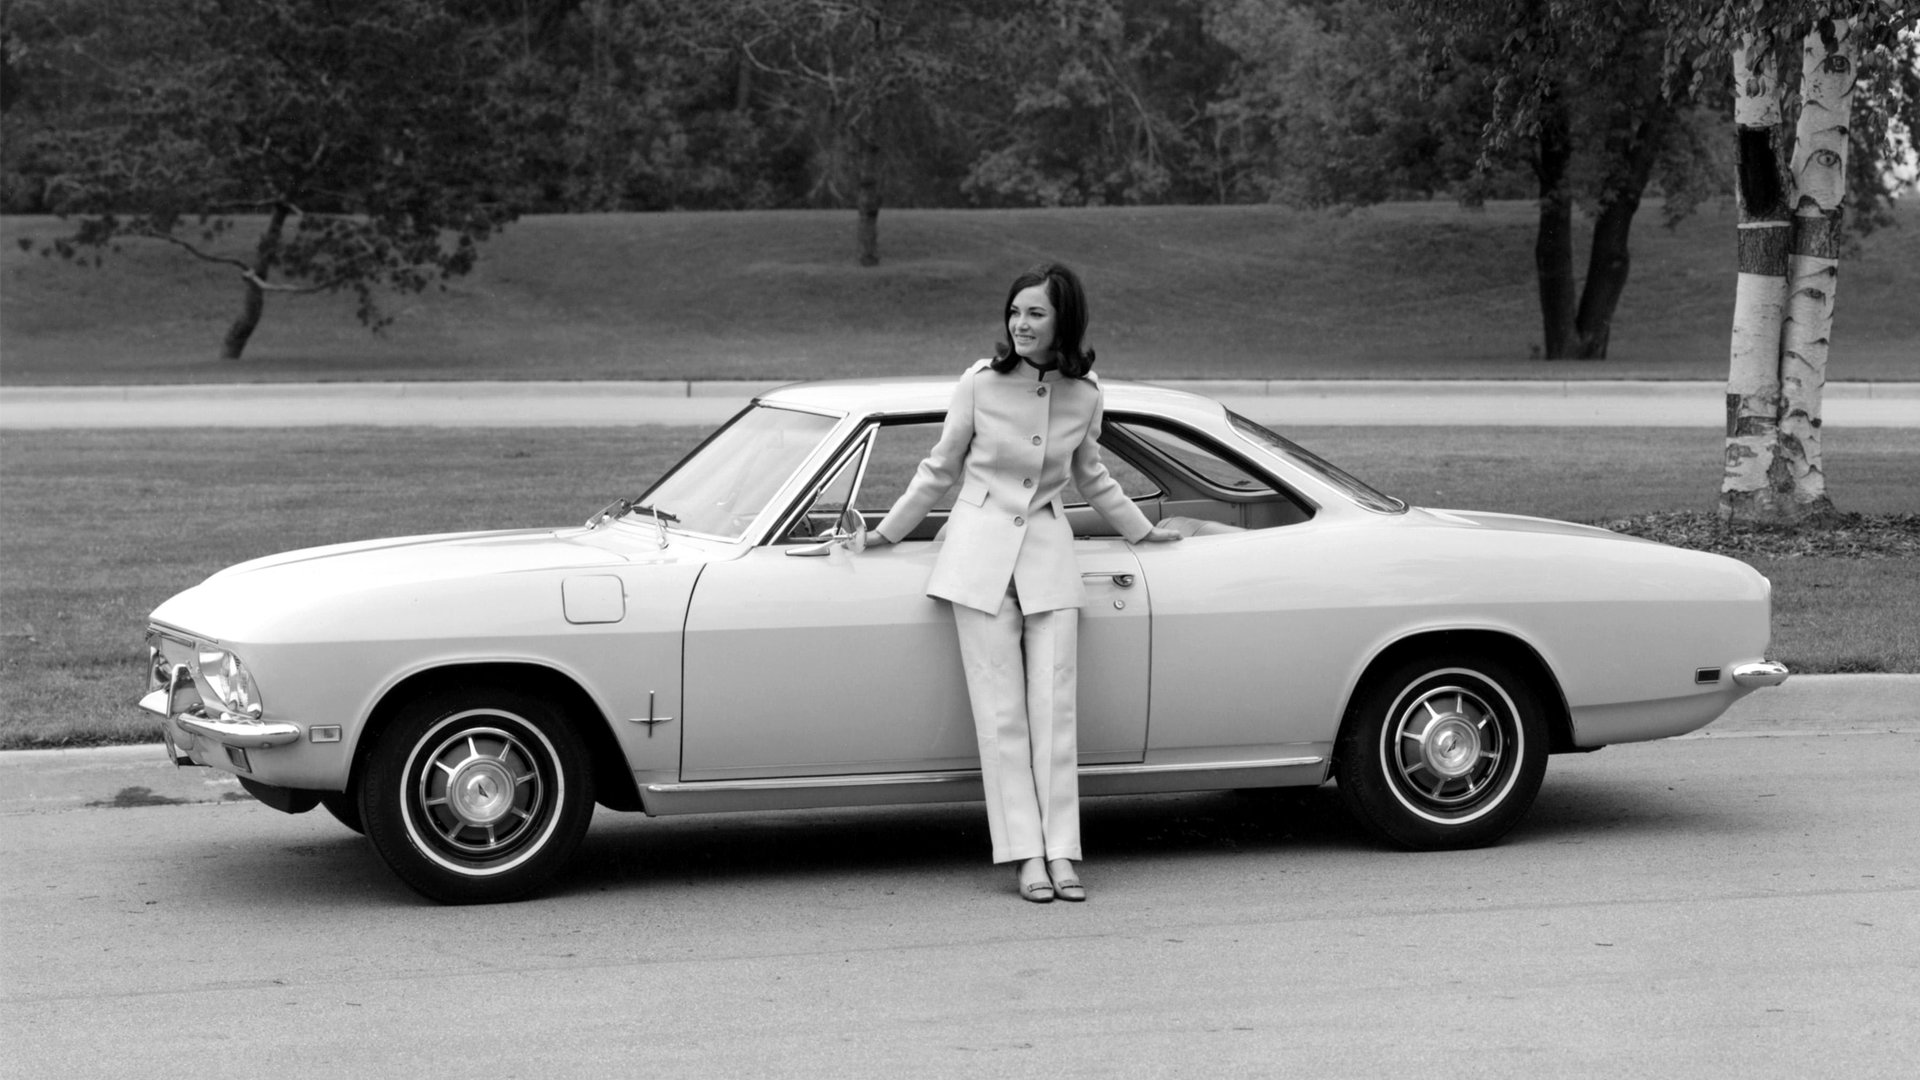 1969 Chevrolet Corvair Monza Sport Coupe